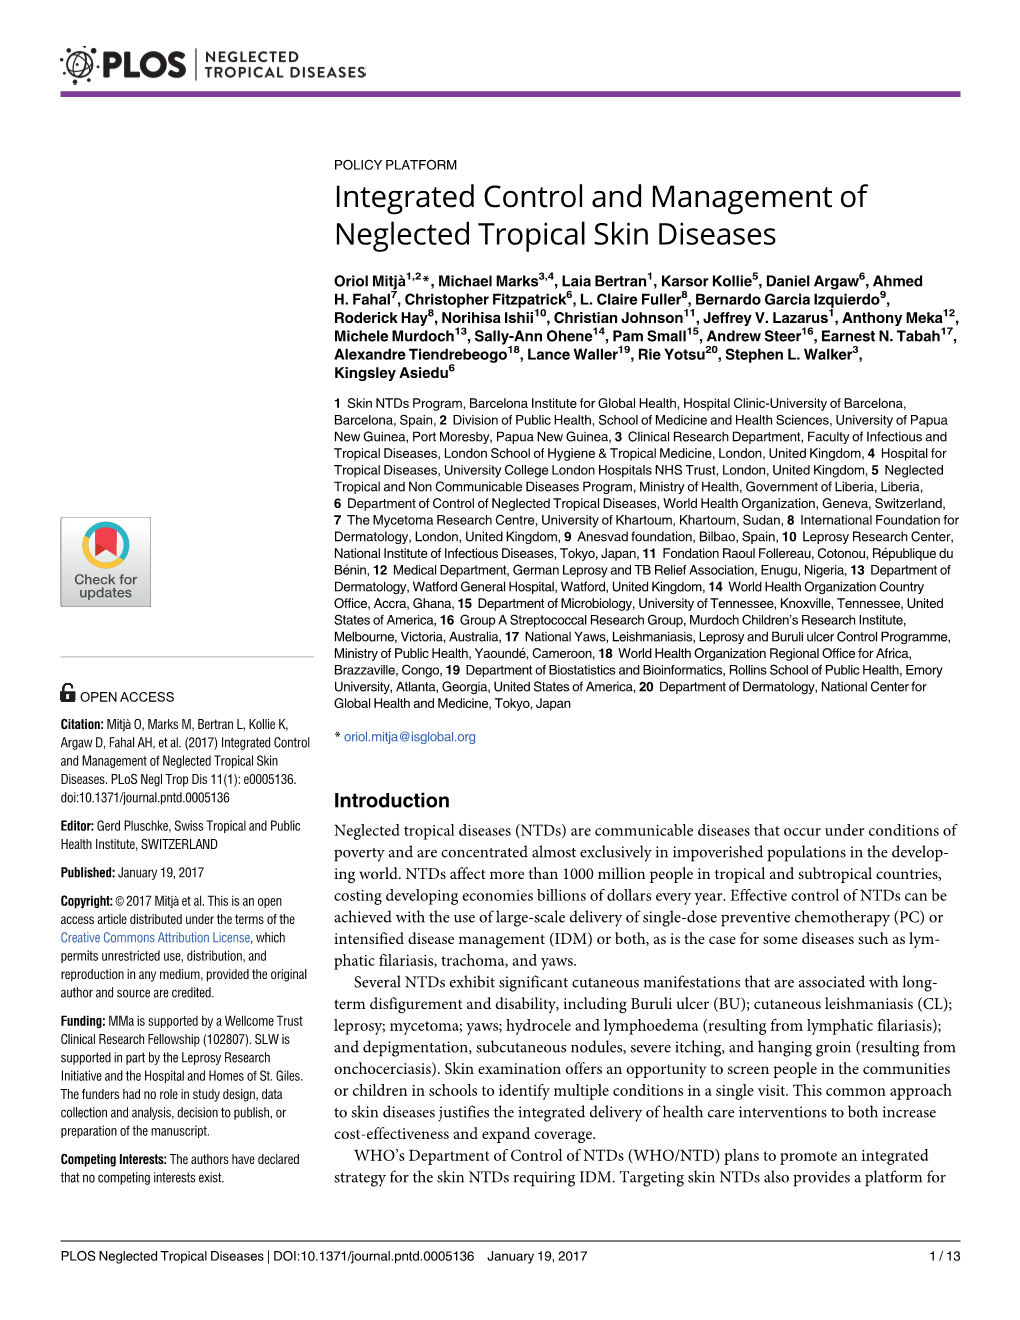 Integrated Control and Management of Neglected Tropical Skin Diseases